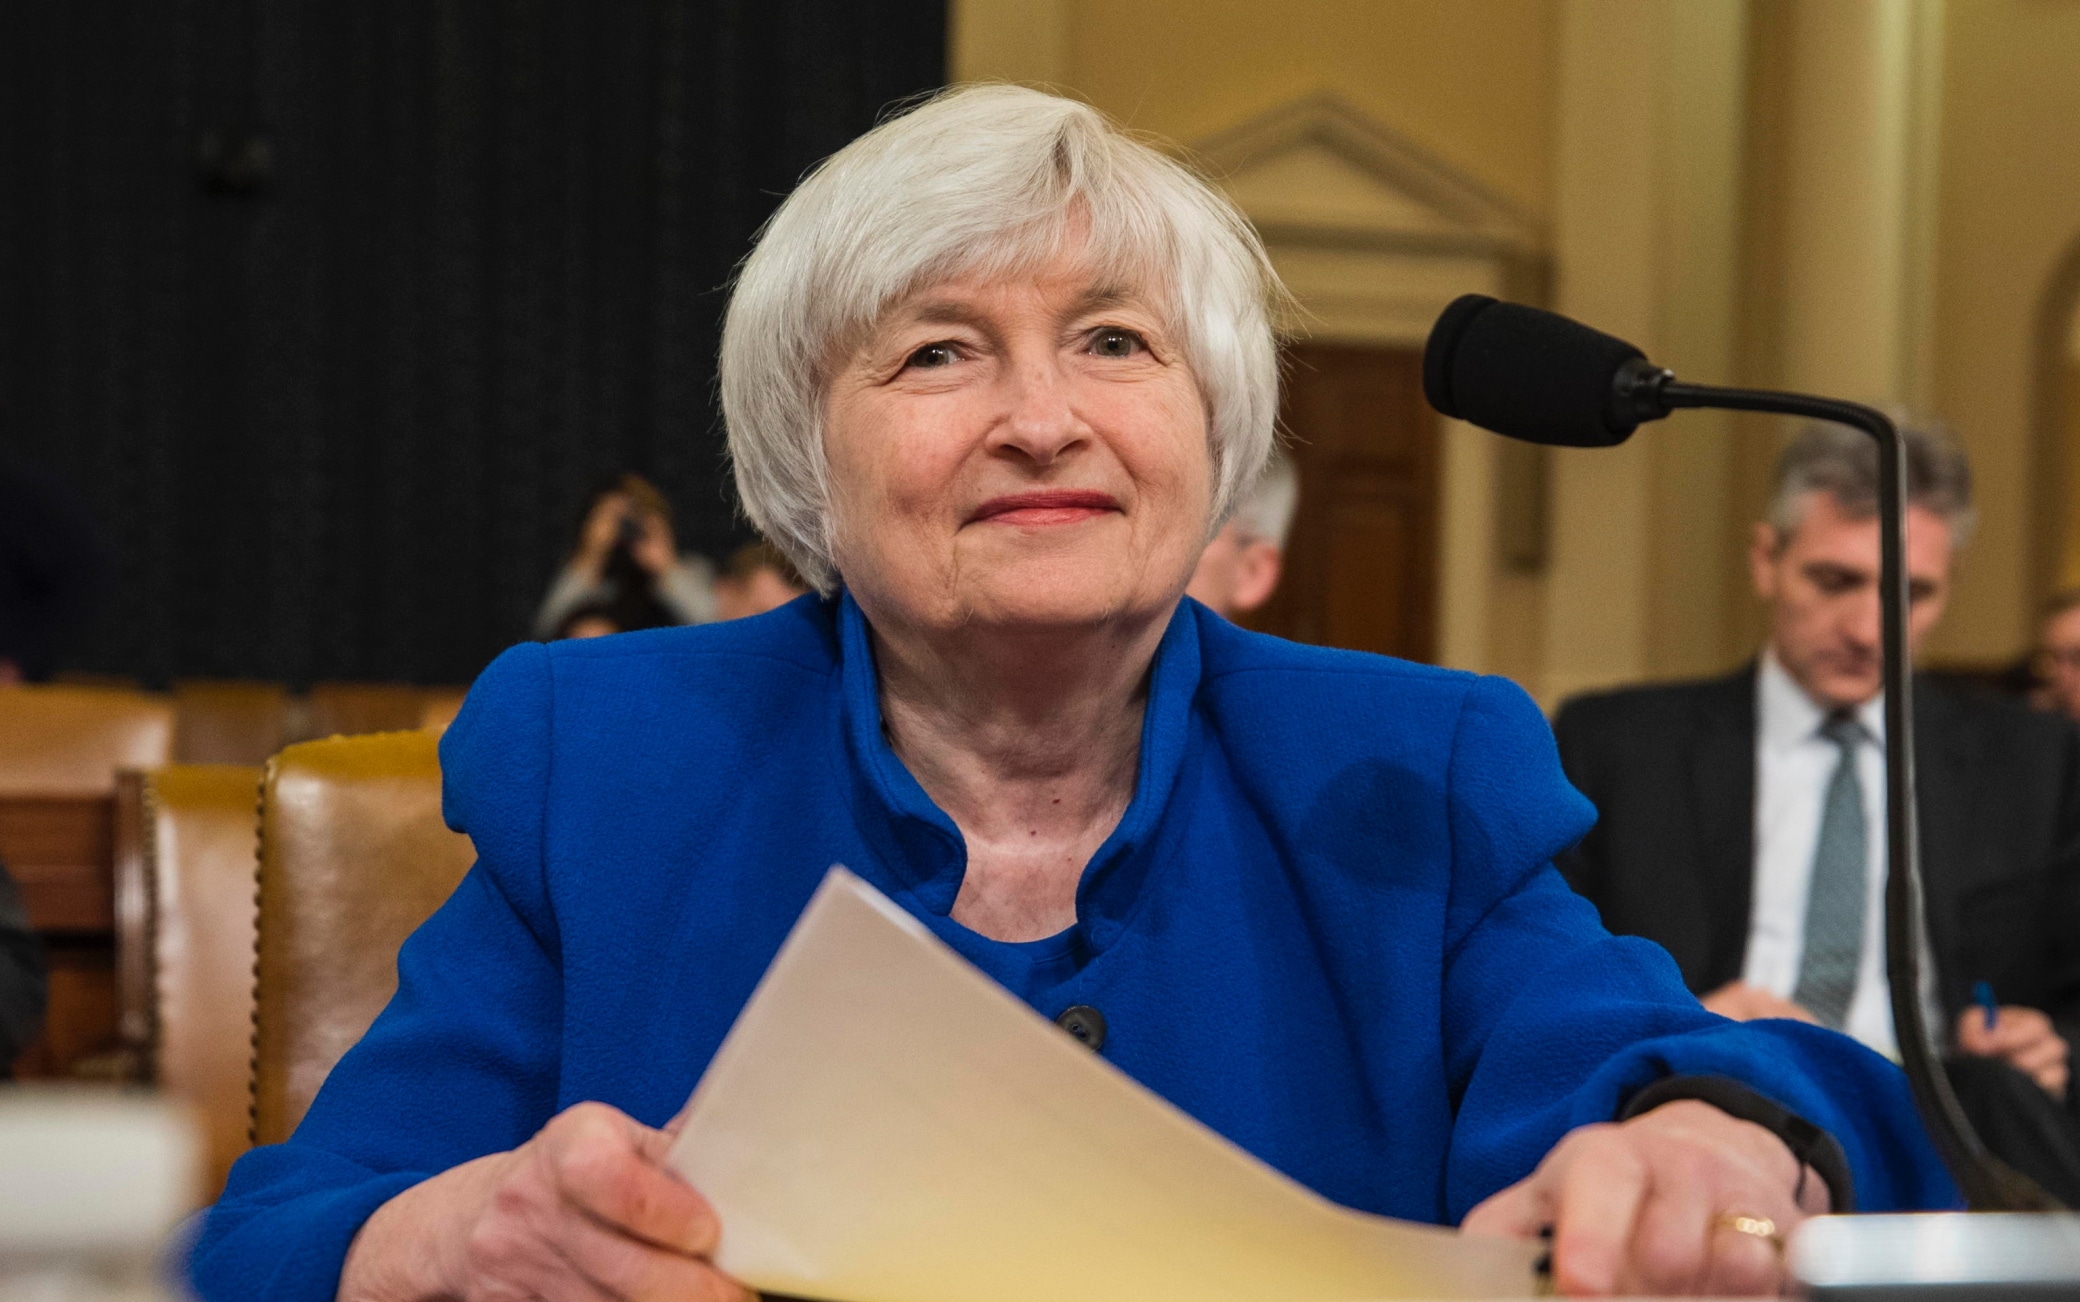 Yellen to the US Congress: “Review debt ceiling or risk default”